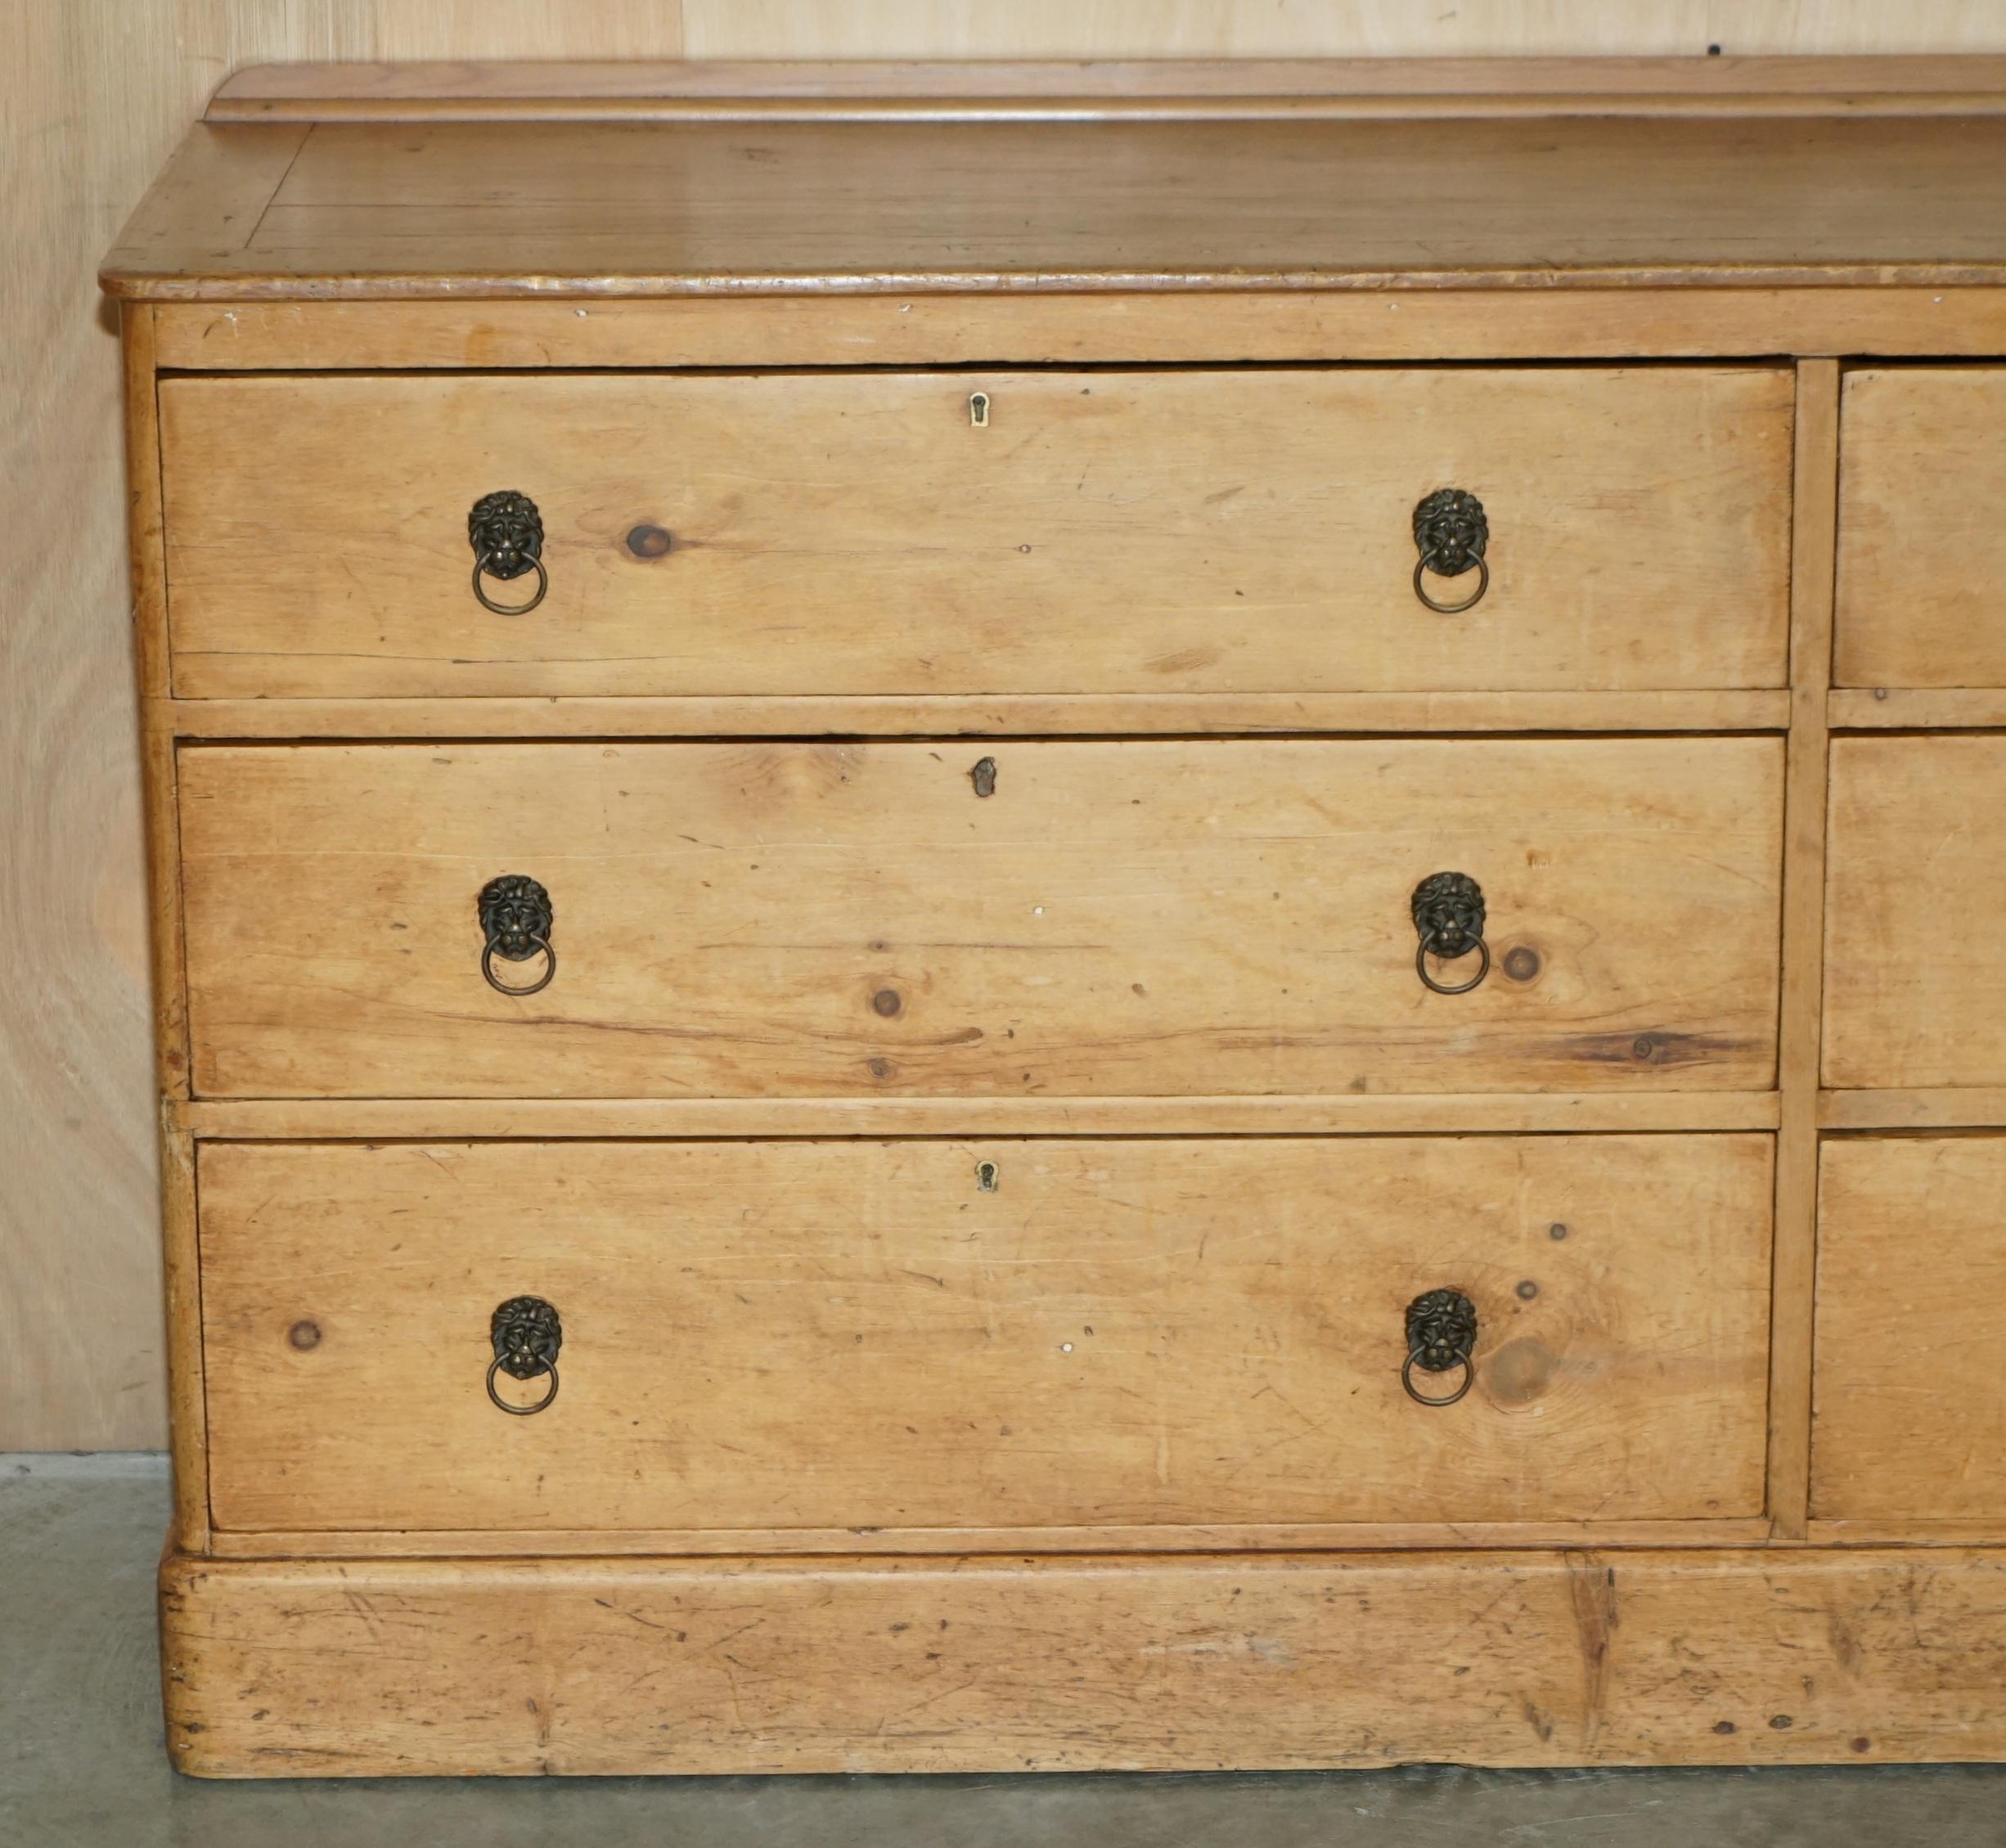 High Victorian SUBLIME ANTiQUE CIRCA 1860 HABBERDASHERY APOCETHCARY BANK OF DRAWERS SIDEBOARD For Sale